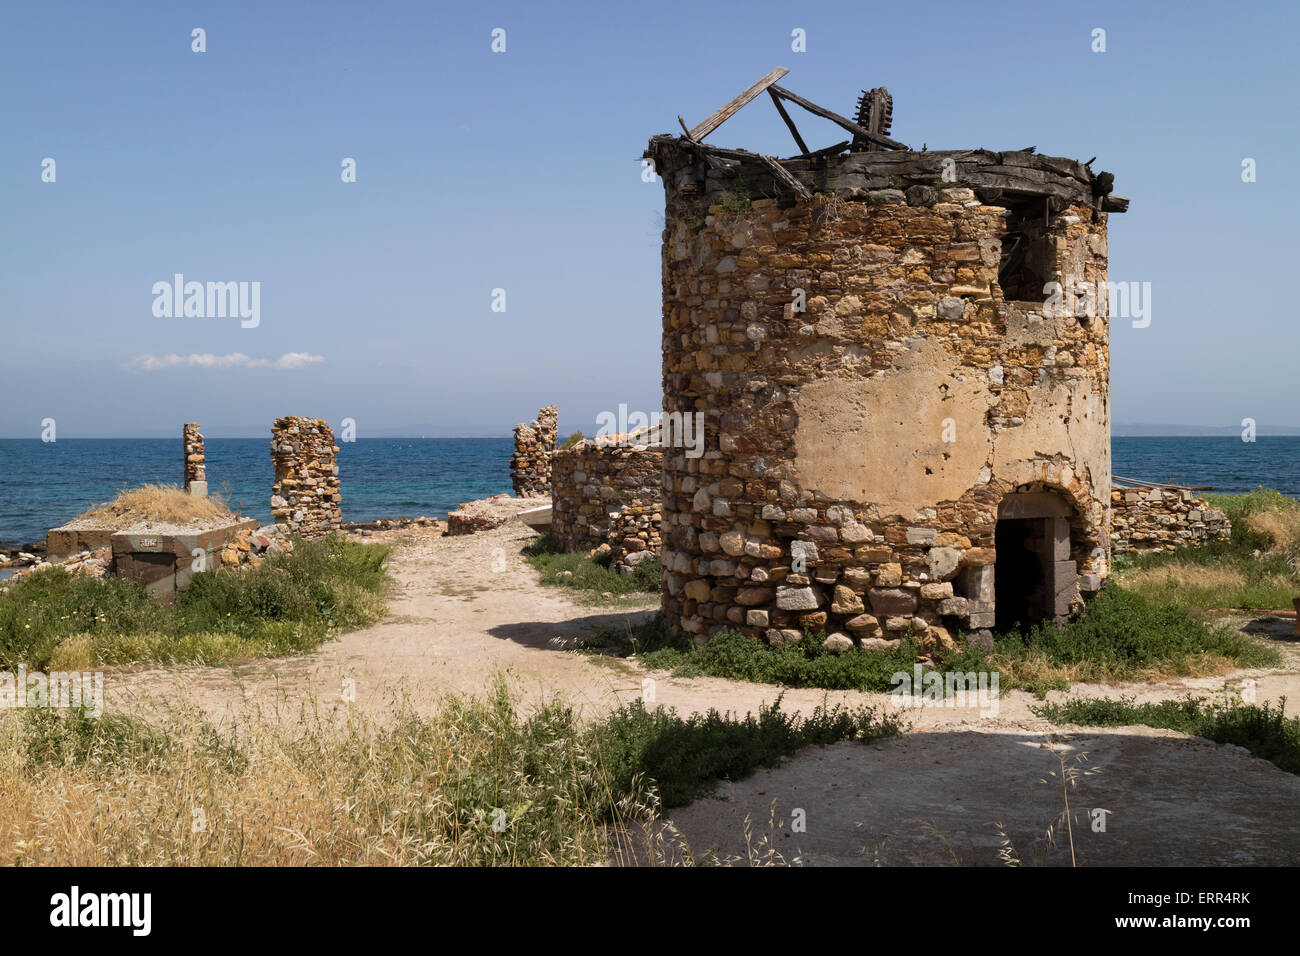 Remains of old windmills at Vrondados on the east coast of Chios, Greece Stock Photo